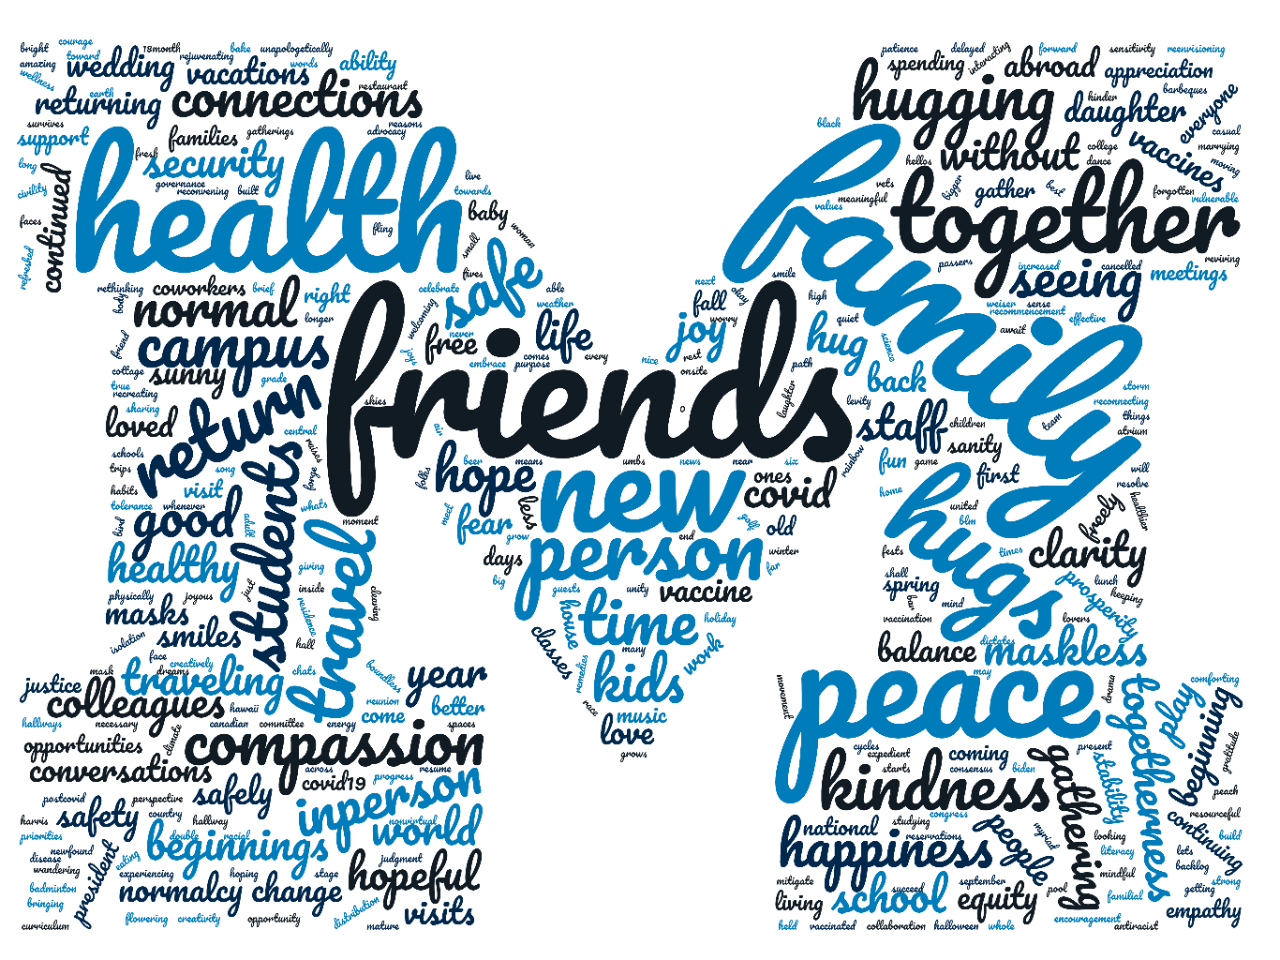 Word cloud from the staff responses. All 454 words are as follows in order of frequency. friends. family. health. peace. community. hugs. new. together. person. return. travel. campus. compassion. hugging. kindness. safe. students. time. connections. good. happiness. hope. inperson. kids. normal. seeing. beginnings. clarity. colleagues. covid. gathering. healthy. hopeful. hug. joy. life. maskless. school. security. staff. togetherness. traveling. without. world. year. abroad. back. balance. beginning. change. continued. conversations. daughter. equity. fear. free. love. loved. masks. normalcy. people. play. returning. safely. safety. smiles. sunny. vacations. vaccine. vaccines. visits. wedding. ability. appreciation. baby. better. classes. come. coming. continuing. covid19. coworkers. days. empathy. equality. everyone. everywhere. fall. families. first. freely. fun. gather. generosity. handshakes. house. interactions. justice. learning. less. living. meetings. music. national. old. ones. opportunities. president. prosperity. right. sanity. spending. spring. stability. support. understanding. visit. work. 0. 18month. able. across. adult. adventures. advocacy. air. amazing. antibodies. antiracist. atrium. attack. await. backlog. badminton. bake. bar. barbeques. beer. best. biden. big. bigger. bird. black. blessings. blm. body. boundless. brief. bright. bringing. build. building. built. canadian. cancelled. caribbean. casual. celebrate. celebrations. central. chats. checking. children. civility. clearing. climate. collaboration. college. collegiality. comes. comforting. committee. congress. consensus. costofliving. cottage. country. courage. creatively. creativity. curriculum. cycles. dance. dedication. deepening. deeply. delayed. democracy. describing. determination. dictates. dinners. direction. disease. distancing. distribution. double. drama. dreams. drinks. earth. eating. effective. embrace. encouragement. end. energy. environment. equally. ethnicity. every. exotic. expedient. experiencing. face. faces. familial. far. fearlessly. fests. financial. fives. flexibilities. fling. flowering. focusing. folks. forge. forgotten. forward. fresh. friend. futures. game. gatherings. getting. giving. golf. governance. grade. grandson. grateful. gratitude. greater. grow. grows. growth. guests. habits. hall. halloween. hallway. hallways. harris. hawaii. healing. healthcare. healthier. heart. held. hellos. high. holding. holiday. home. hoping. hopping. imagine. important. inclusive. increased. inside. inspiration. interacting. isolation. joyous. joys. judgment. just. keeping. kinder. laugh. laughter. leadership. lets. levity. listening. literacy. live. long. longedfor. longer. looking. lovers. lunch. many. marrying. mask. mature. may. meaningful. meaningfully. means. meet. members. mental. mind. mindful. mitigate. mitigating. moment. movement. moving. myriad. near. necessary. never. newfound. news. next. nice. nonvirtual. office. okay. onsite. opportunity. pandemic. pandemics. parents. parties. passers. path. patience. peach. personal. perspective. physically. please. pool. population. possibilities. postcovid. present. priorities. progress. public. purpose. quality. quiet. race. racial. rainbow. raises. reasons. reckoning. recommencement. reconnecting. reconvening. recreating. reenvisioning. refreshed. rejuvenating. related. remedies. remotely. reservations. residence. resolve. resourceful. respect. respectful. rest. restaurant. resume. rethinking. reunion. reviving. schools. science. sense. sensitivity. september. service. shall. sharing. six. skies. small. smile. social. solidarity. somewhere. song. sourdough. spaces. spent. stage. starts. staying. stopped. storm. strengthening. strong. studying. succeed. success. sunshine. supporting. survives. team. thankful. things. thrive. times. tolerance. toronto. toward. towards. tranquility. travelling. treated. trips. TRUE. truly. umbs. unapologetically. united. unites. unity. unmasked. vaccinated. vaccination. values. vets. vulnerable. wandering. weather. weekends. weiser. welcoming. wellness. whats. whenever. whole. will. winter. within. woman. words. working. worklife. worry. worryfree.